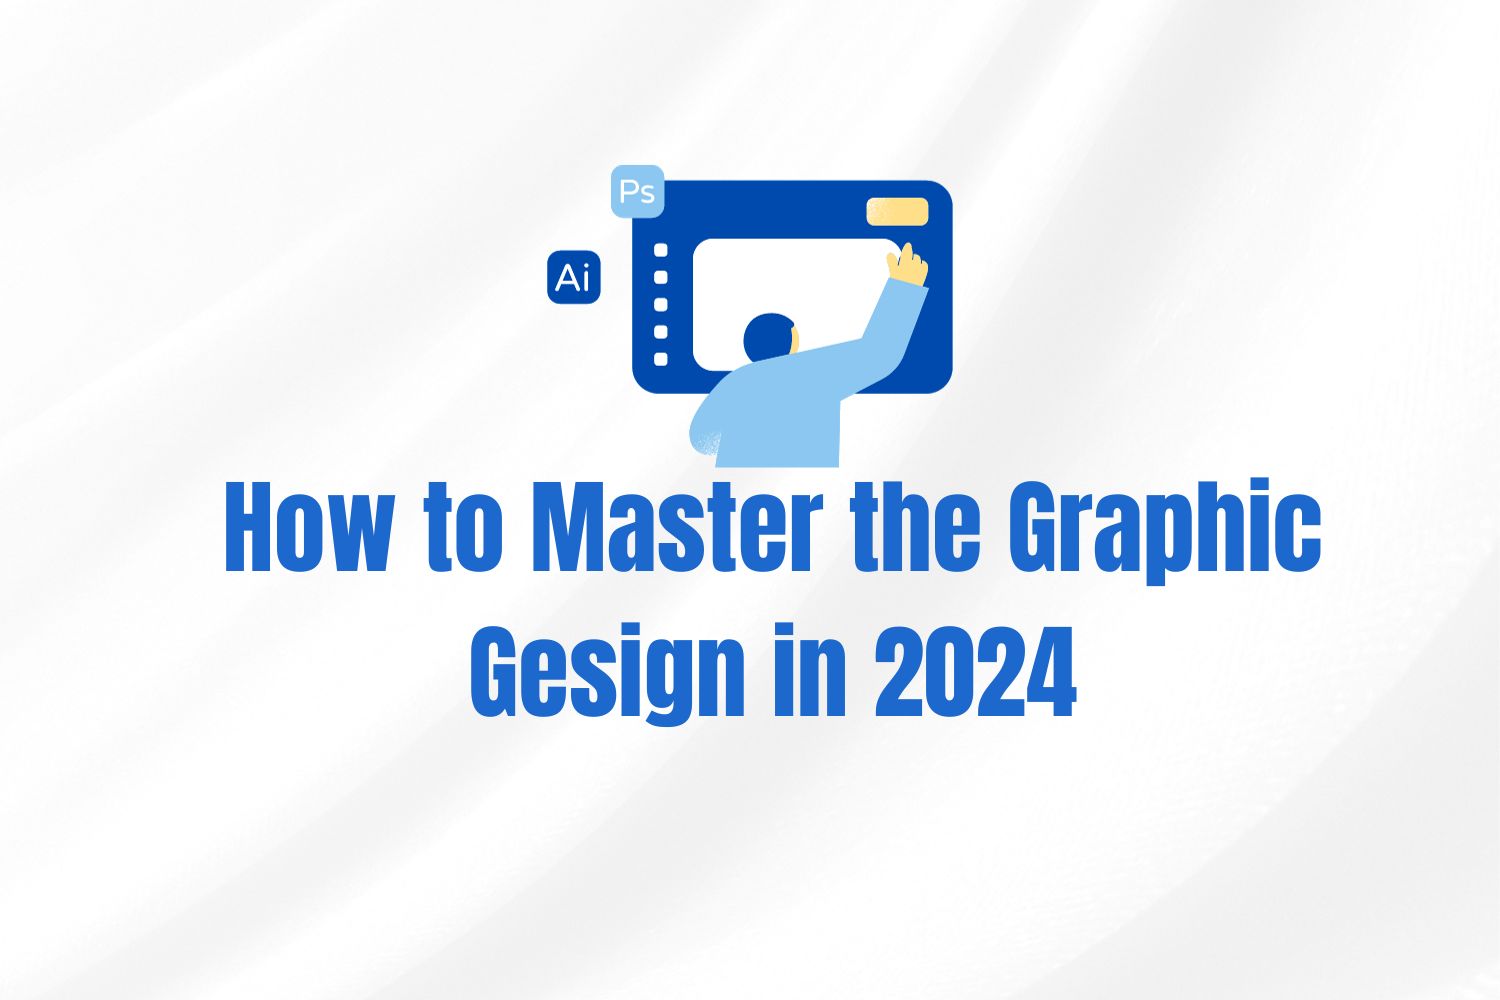 how to Master the graphic design in 2024